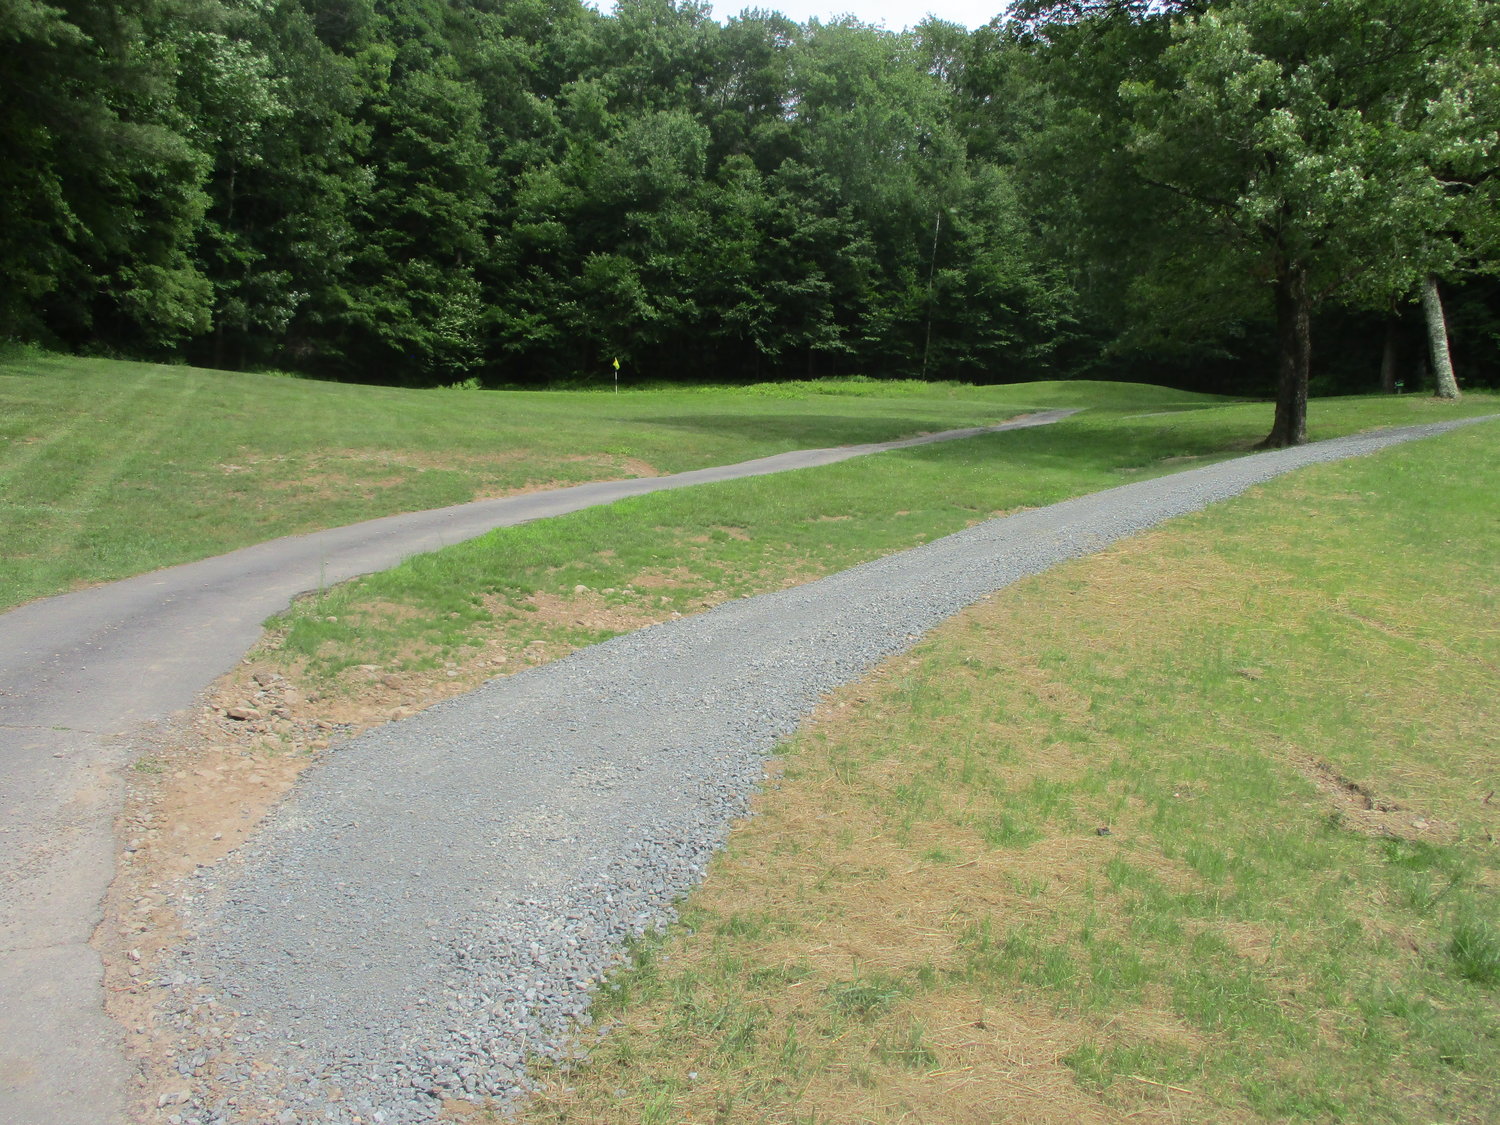 A new cart path, right, replaces an old path, left, on the 4th hole at Twin Village Golf Course with the new path taking you to the fifth tee and a cart path to the fifth fairway.